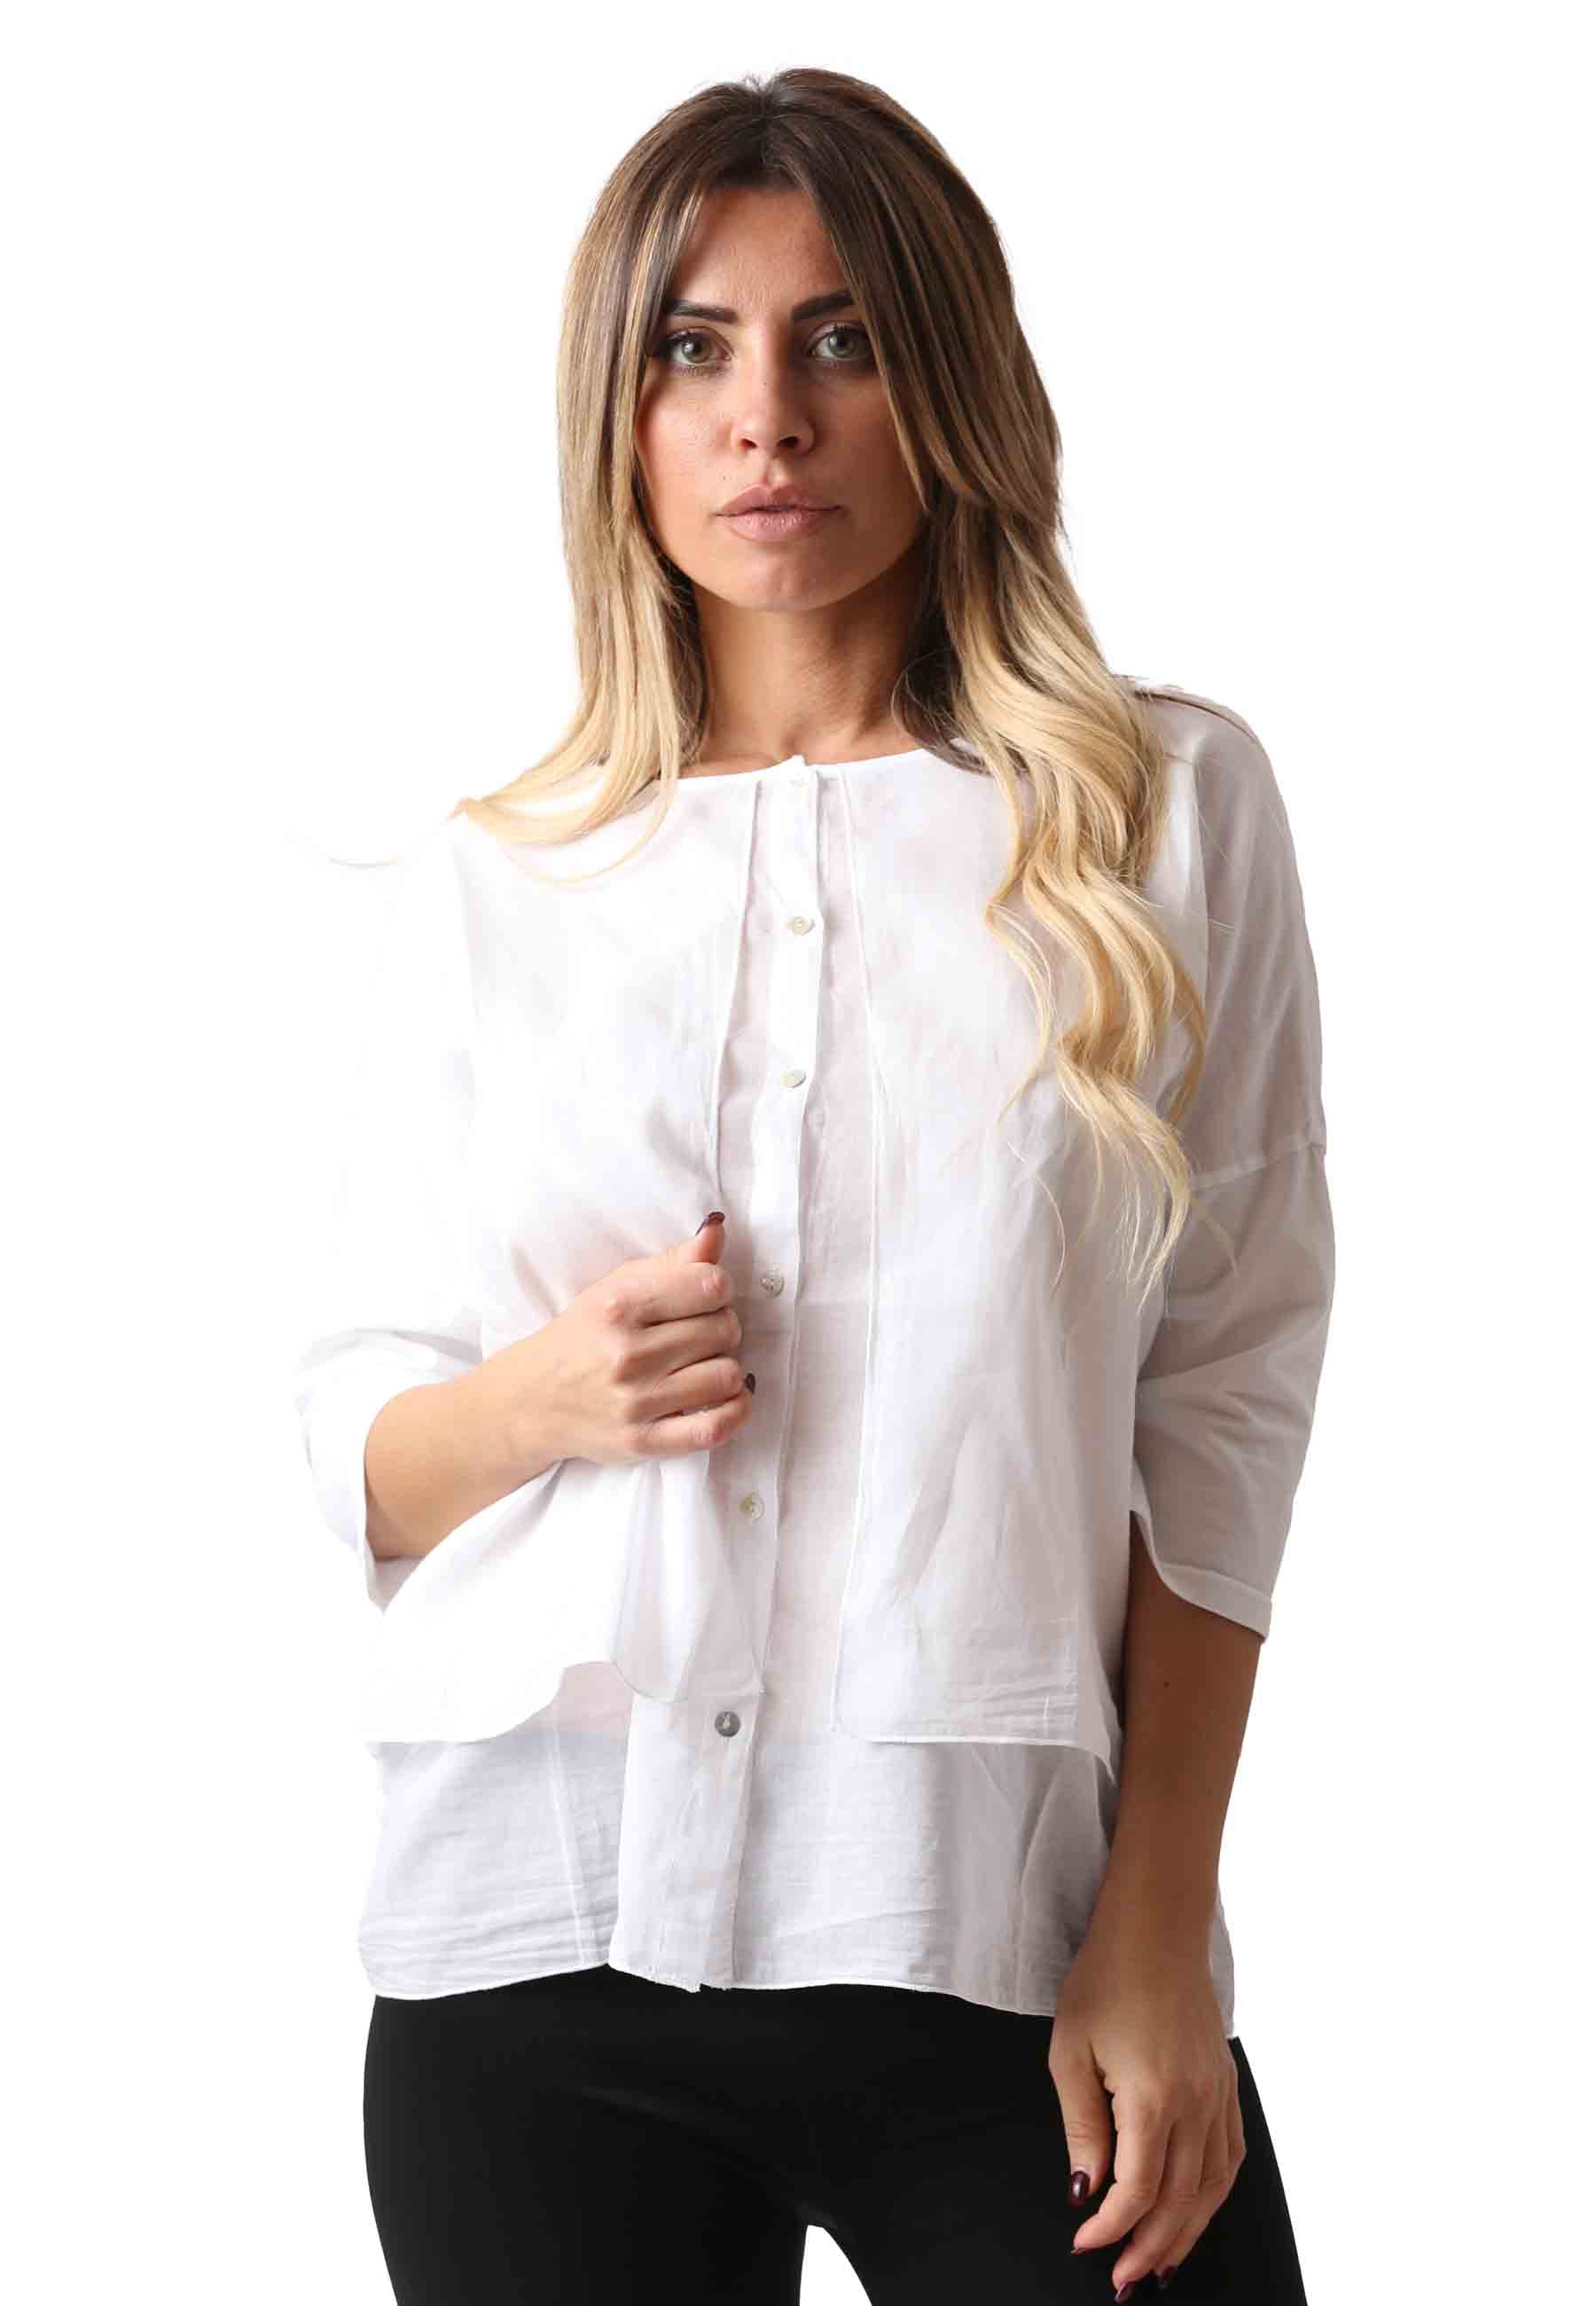 Cala women's shirt in white cotton with three-quarter sleeves